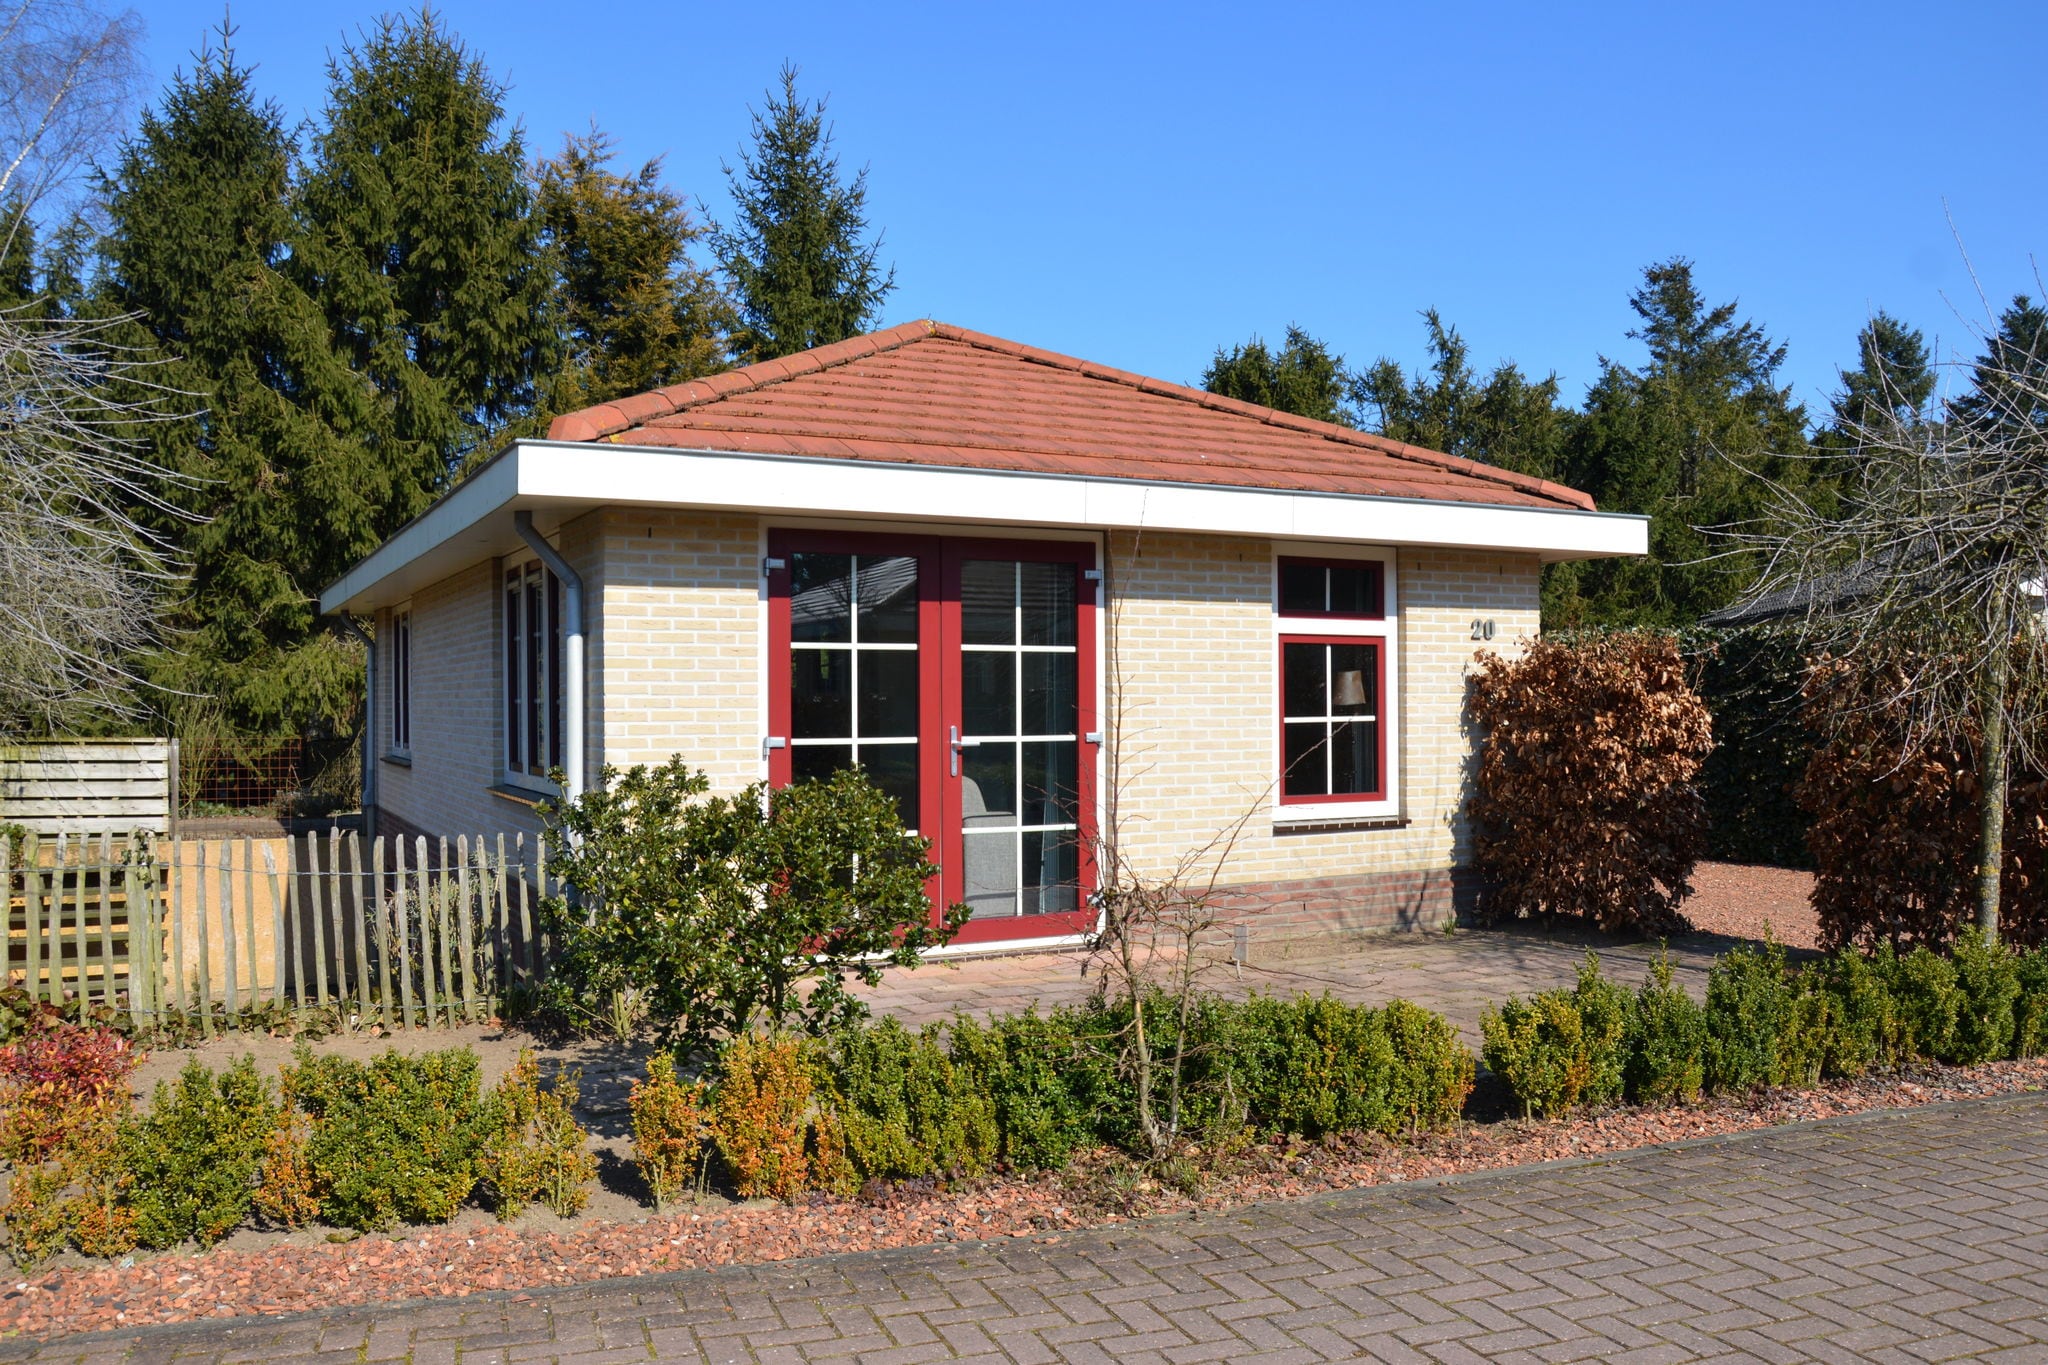 Holiday home in the Veluwe in nature